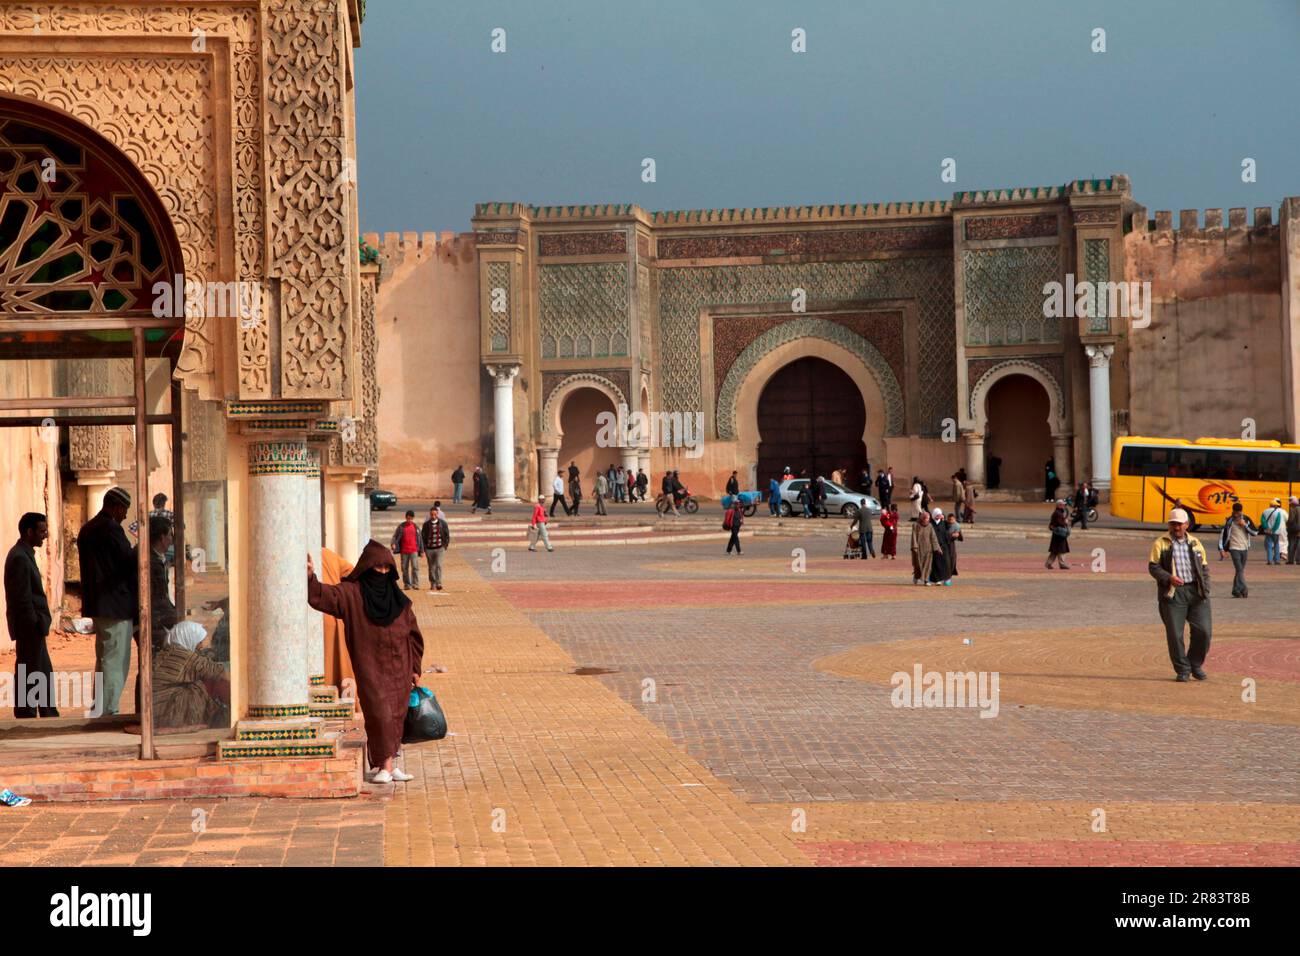 The Place el Hedim, in the background the Bab el Mansour, Meknes Morocco Stock Photo